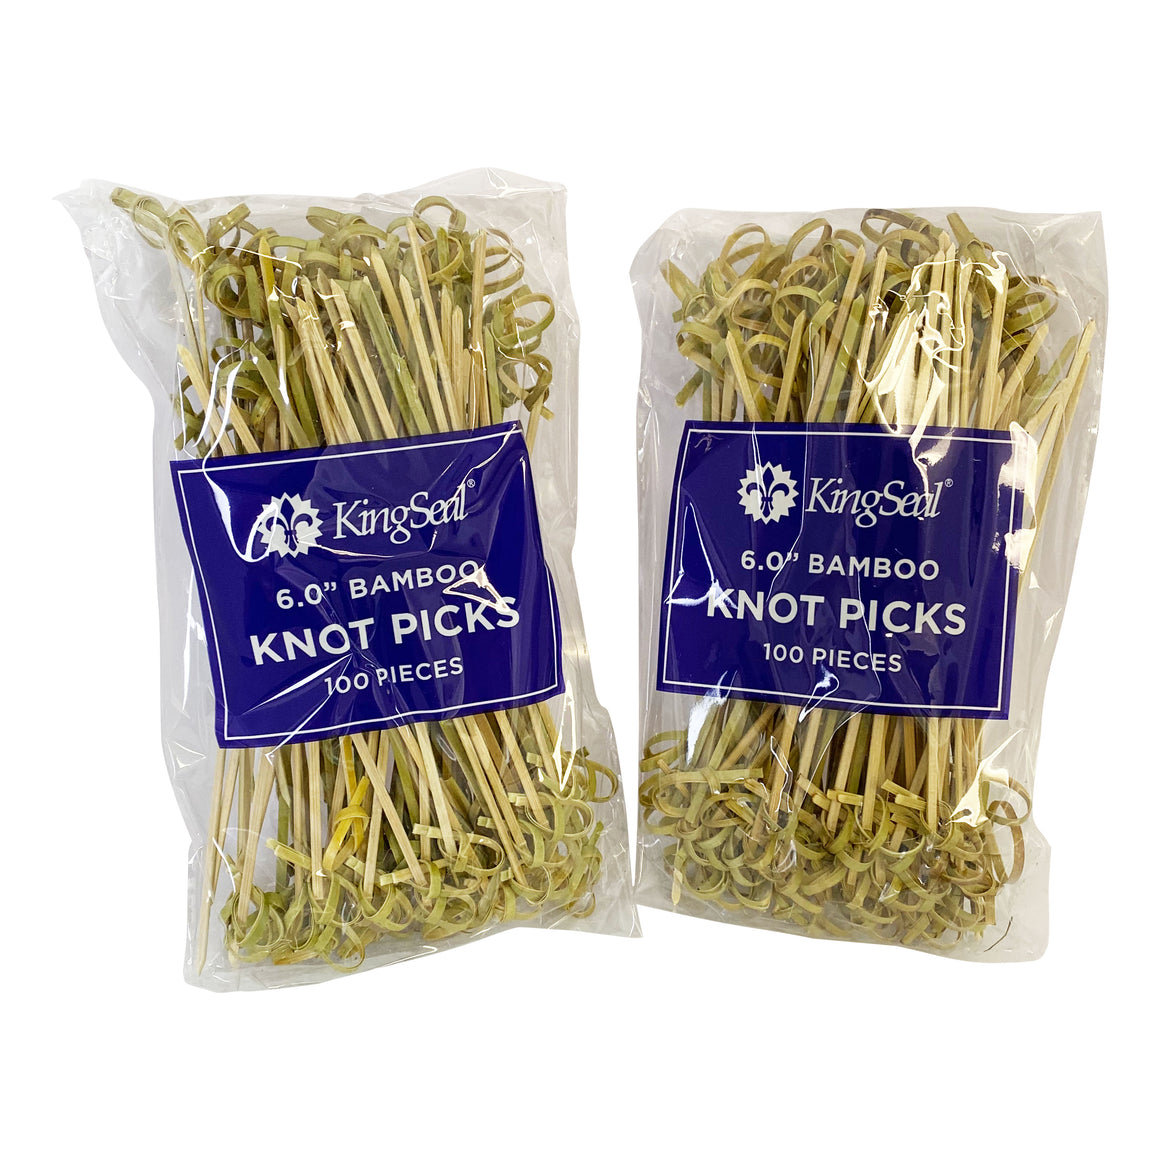 KingSeal Bamboo Knot Picks, 6.0 Inch - Perfect for Cocktails and Appetizers